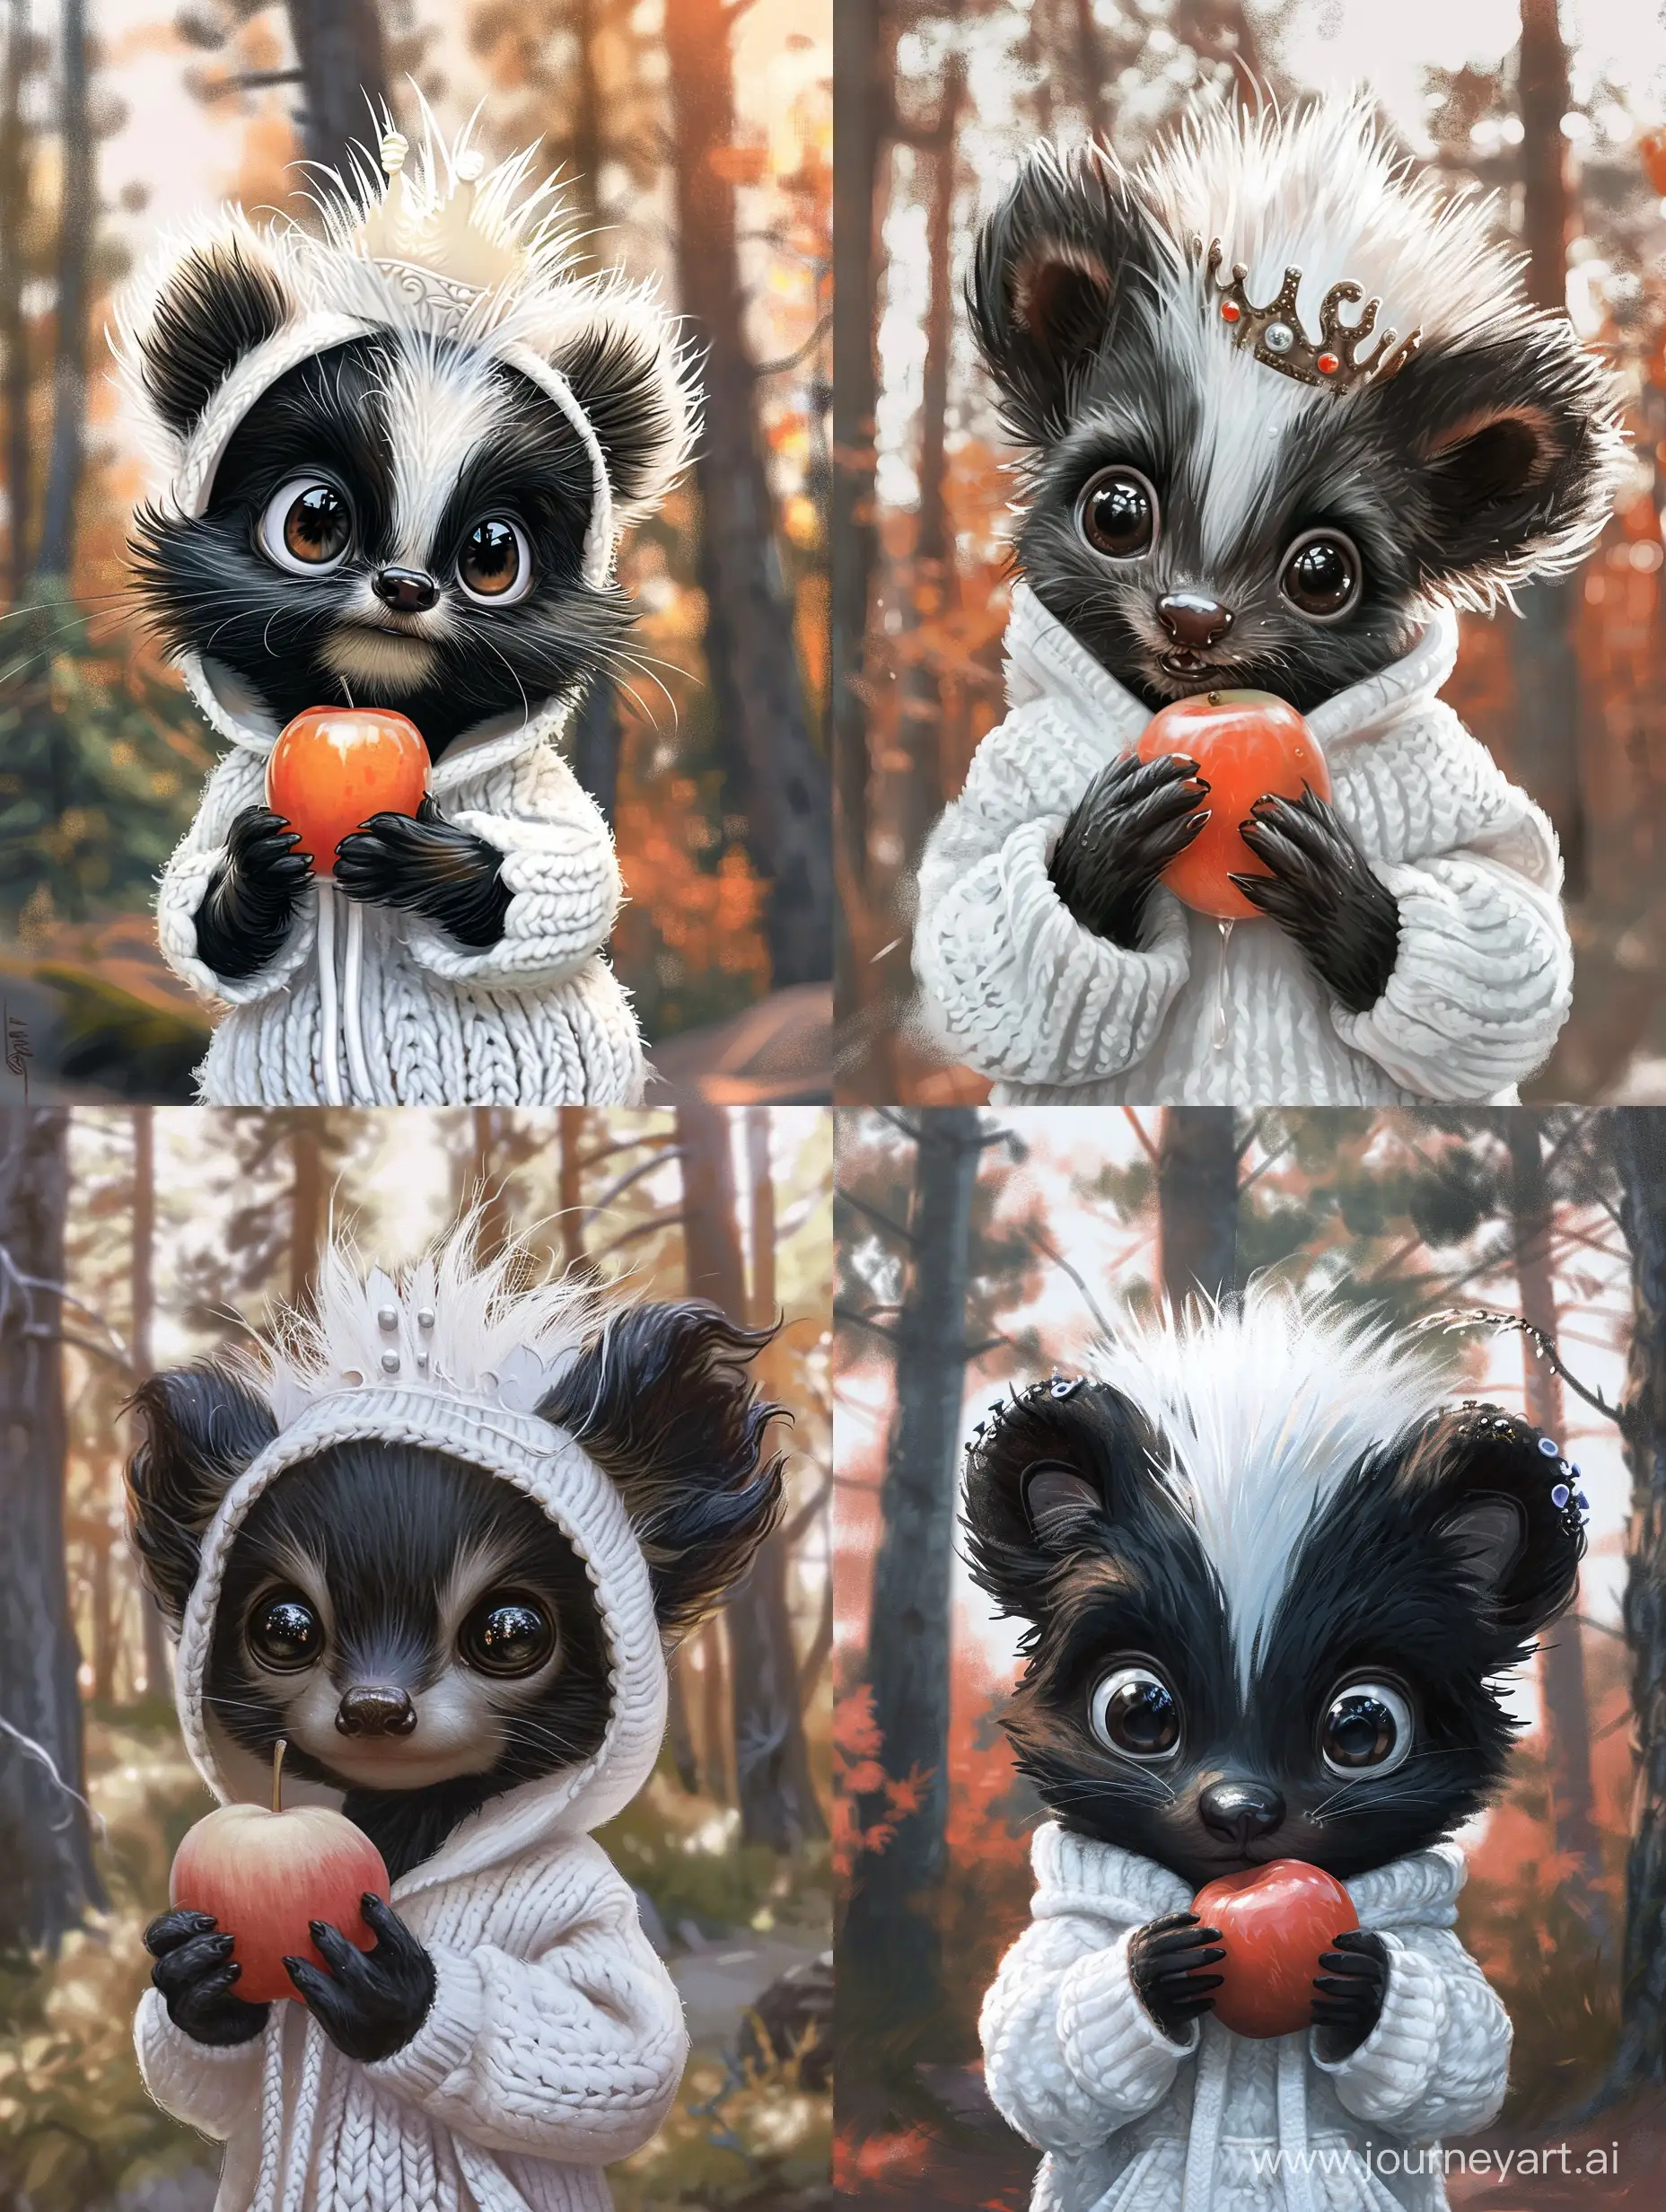 Adorable-Tiny-Skunk-Cub-Wearing-Crown-and-Holding-Apple-in-Sunny-Forest-Scene